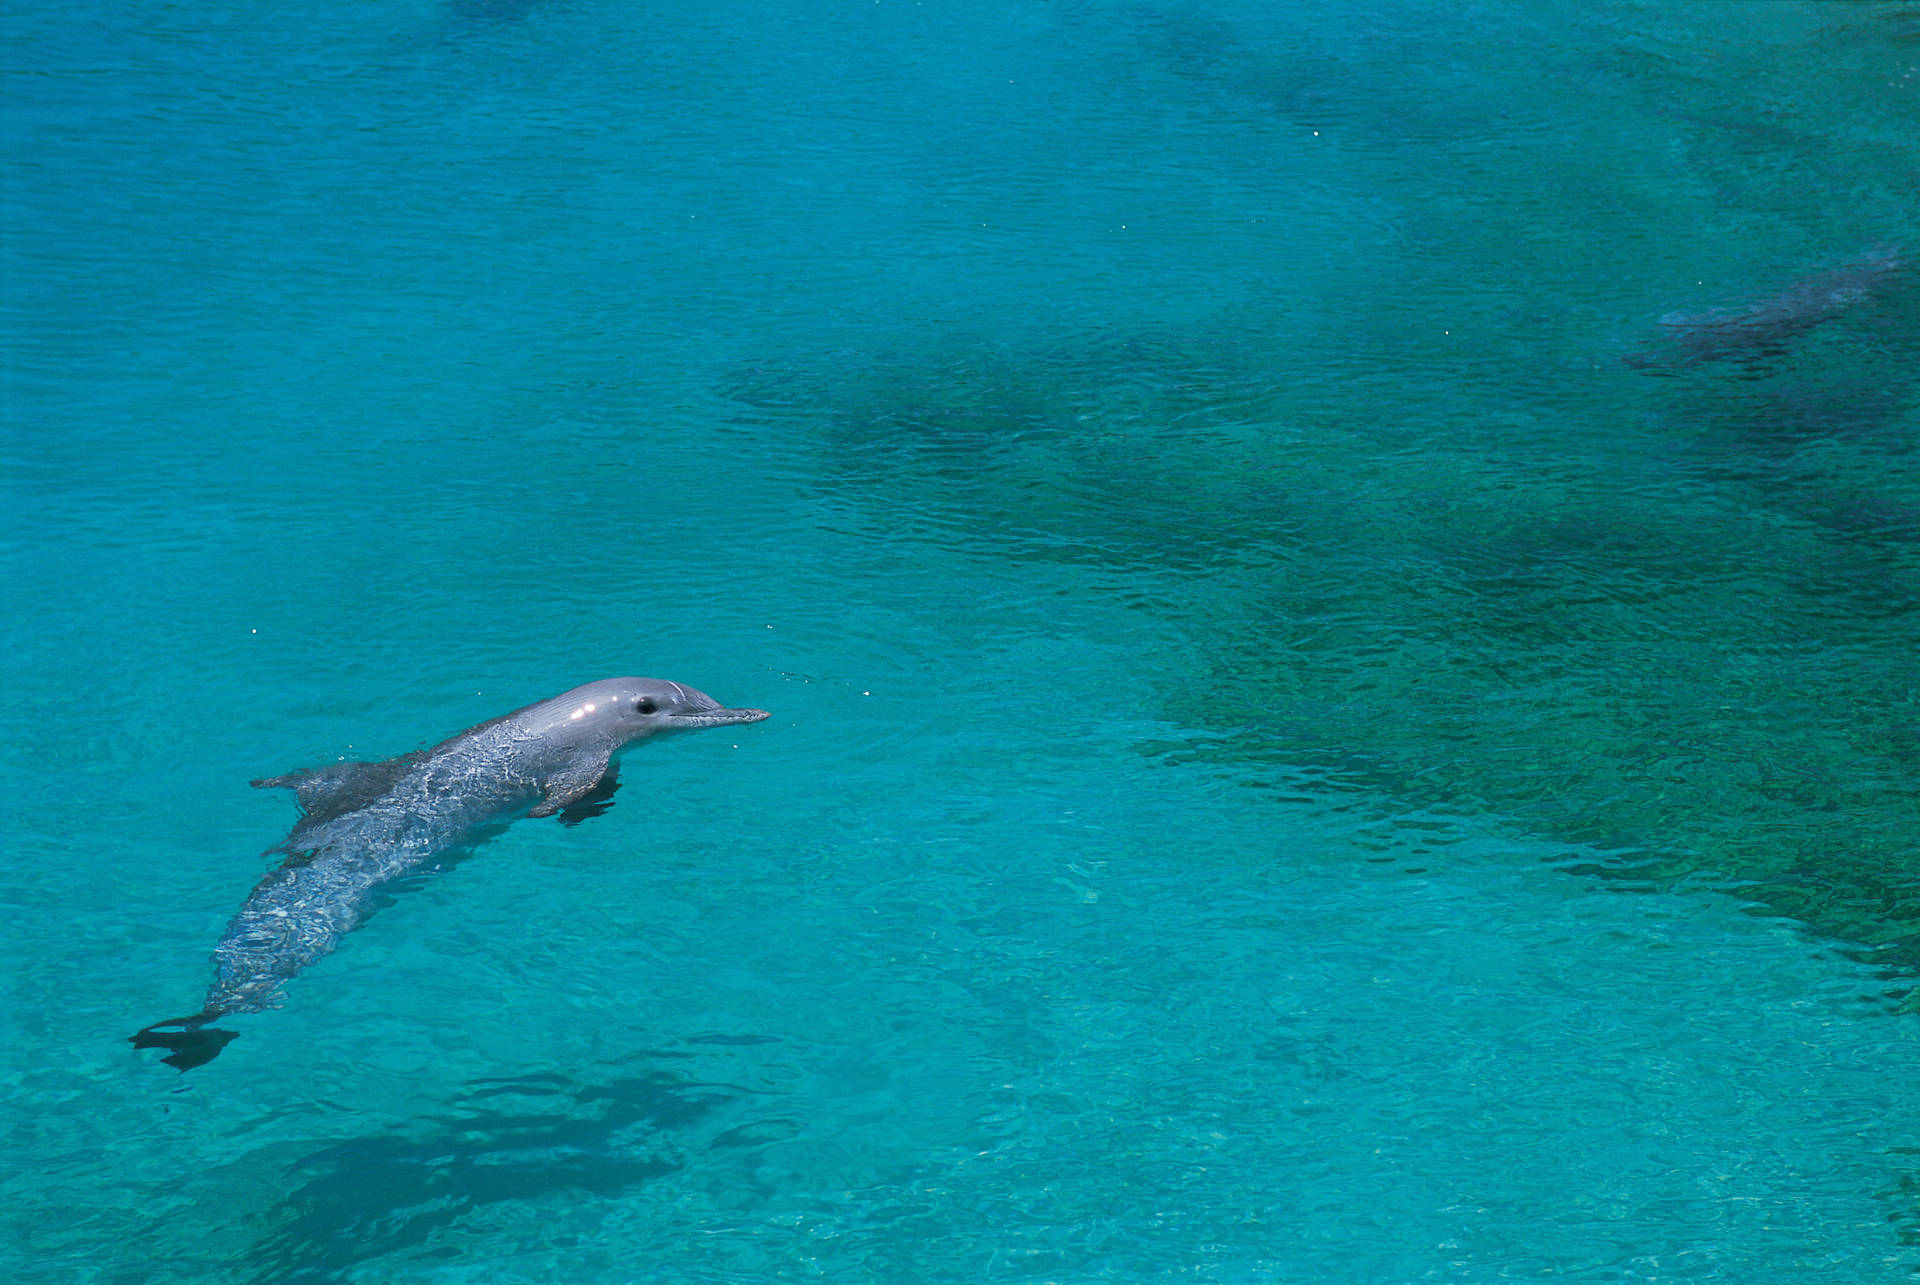 Dolphin 5110X3420 Wallpaper and Background Image